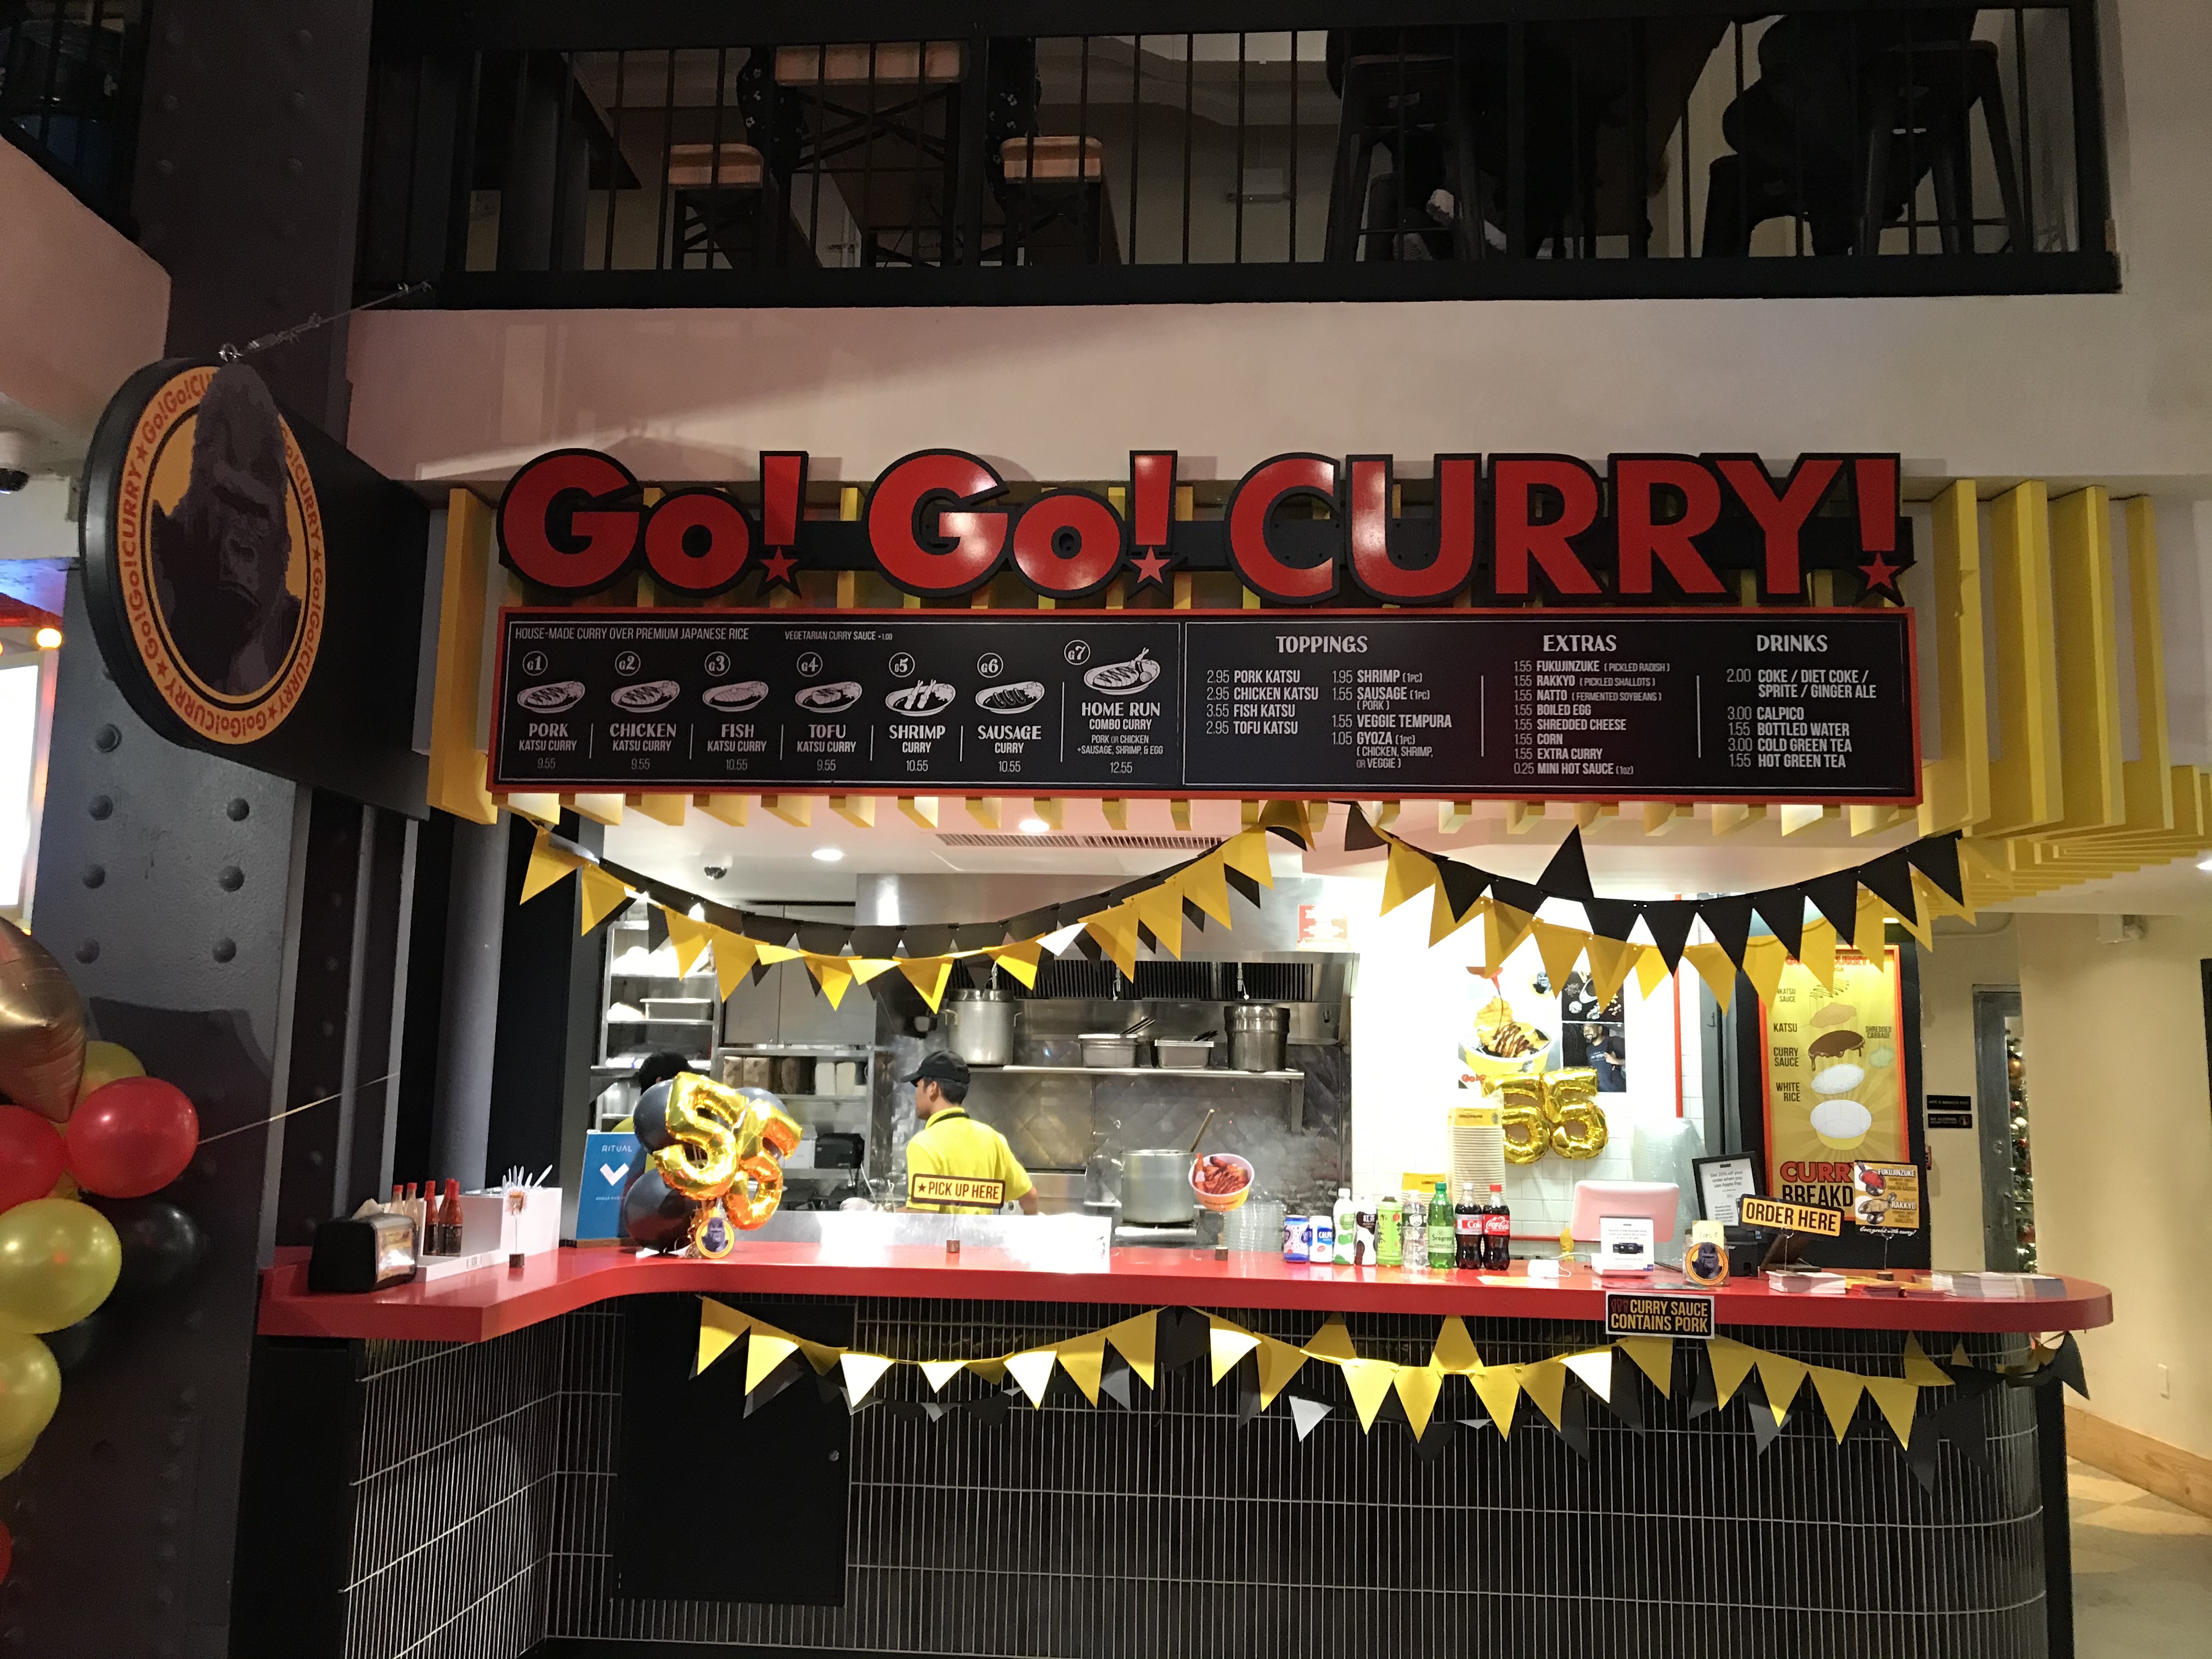 PRESS RELEASE:  Go! Go! Curry!  Opens 7th NYC Location in Hell’s Kitchen